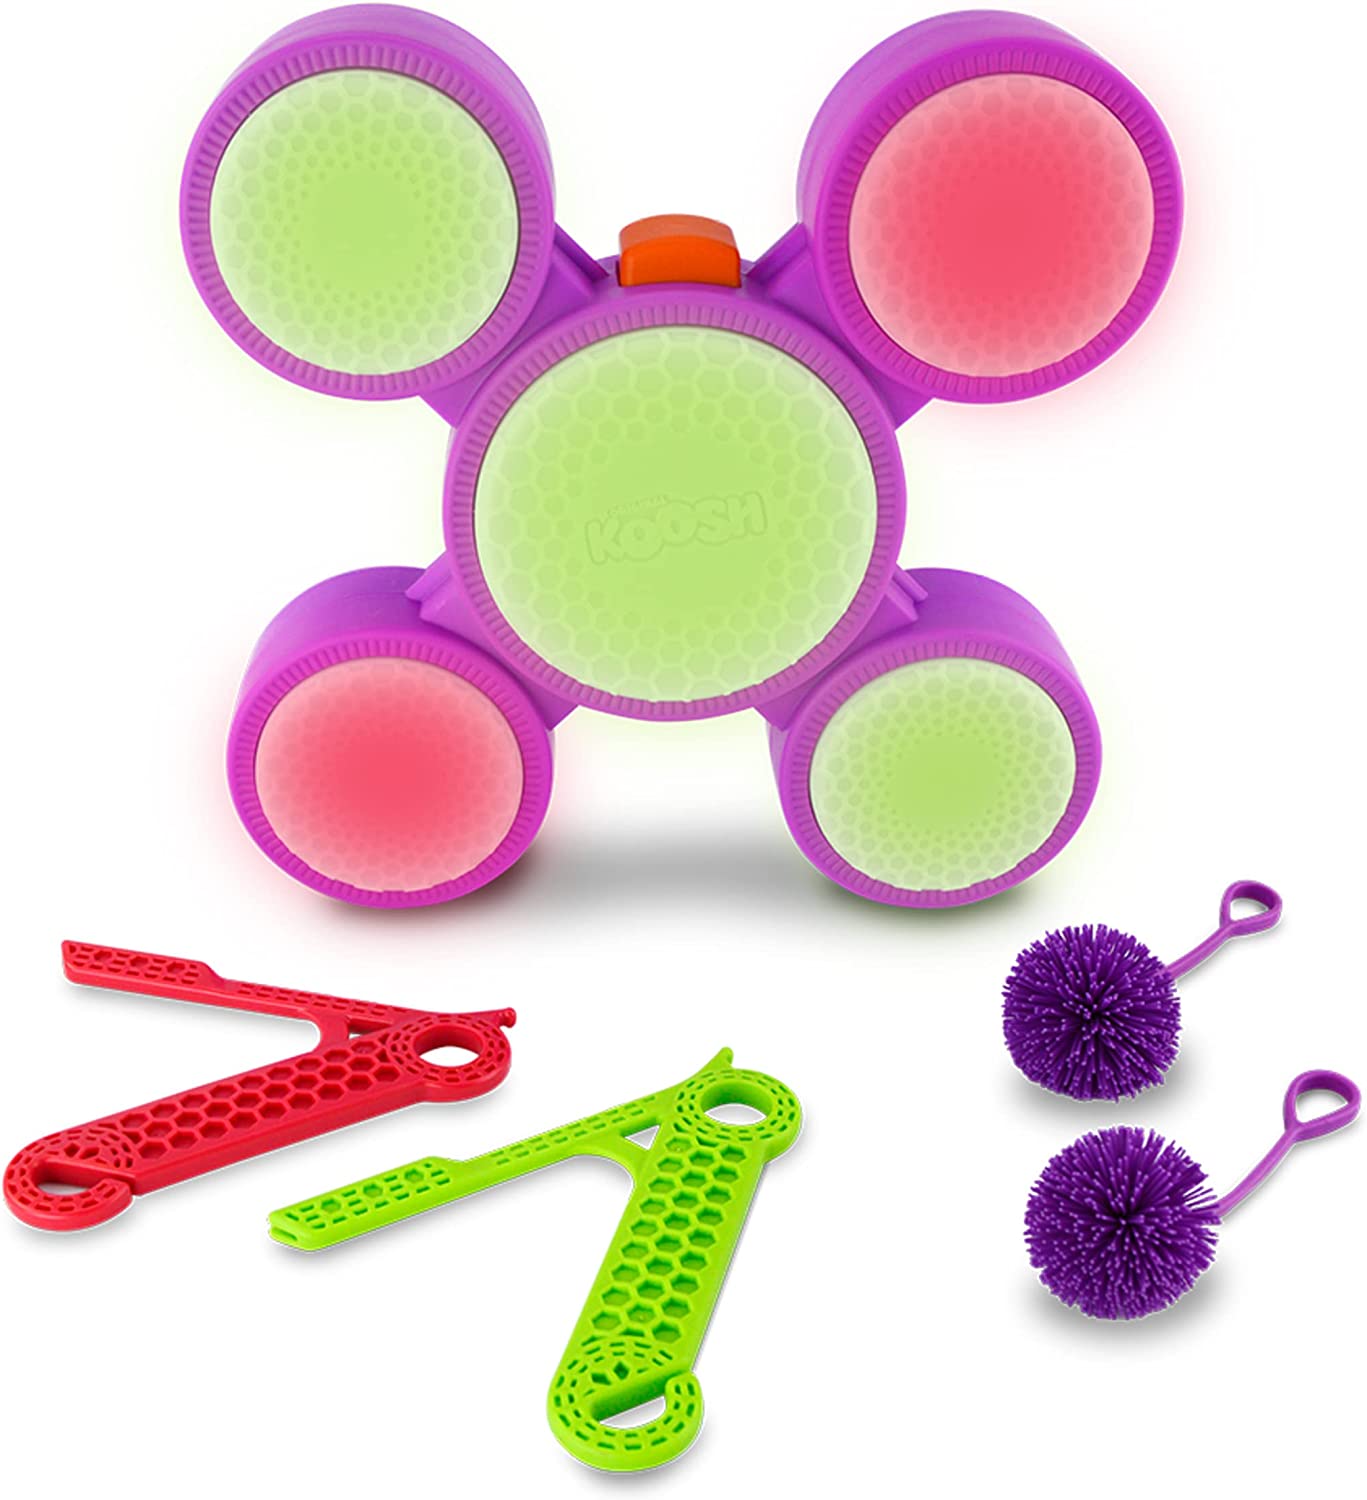 Koosh Sharp Shot Interactive Target (3 Games to Play) $6 + Free Shipping w/ Prime or on orders over $35